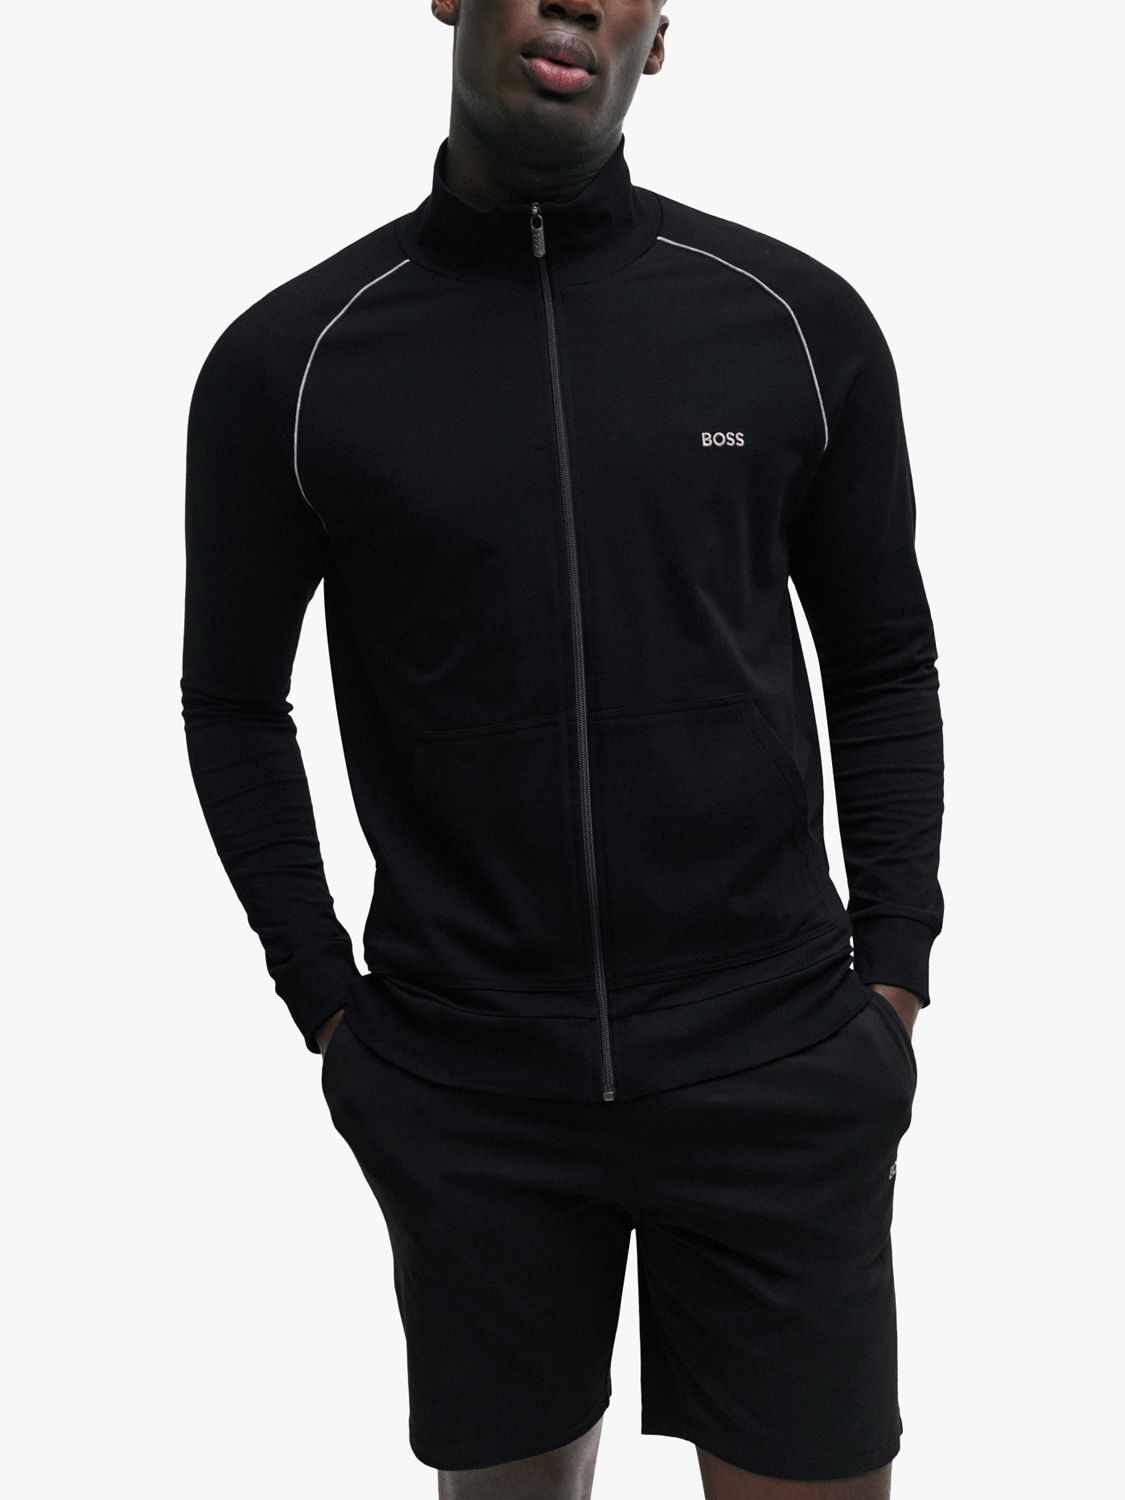 BOSS Contrast Piping Track Top, Black at John Lewis & Partners